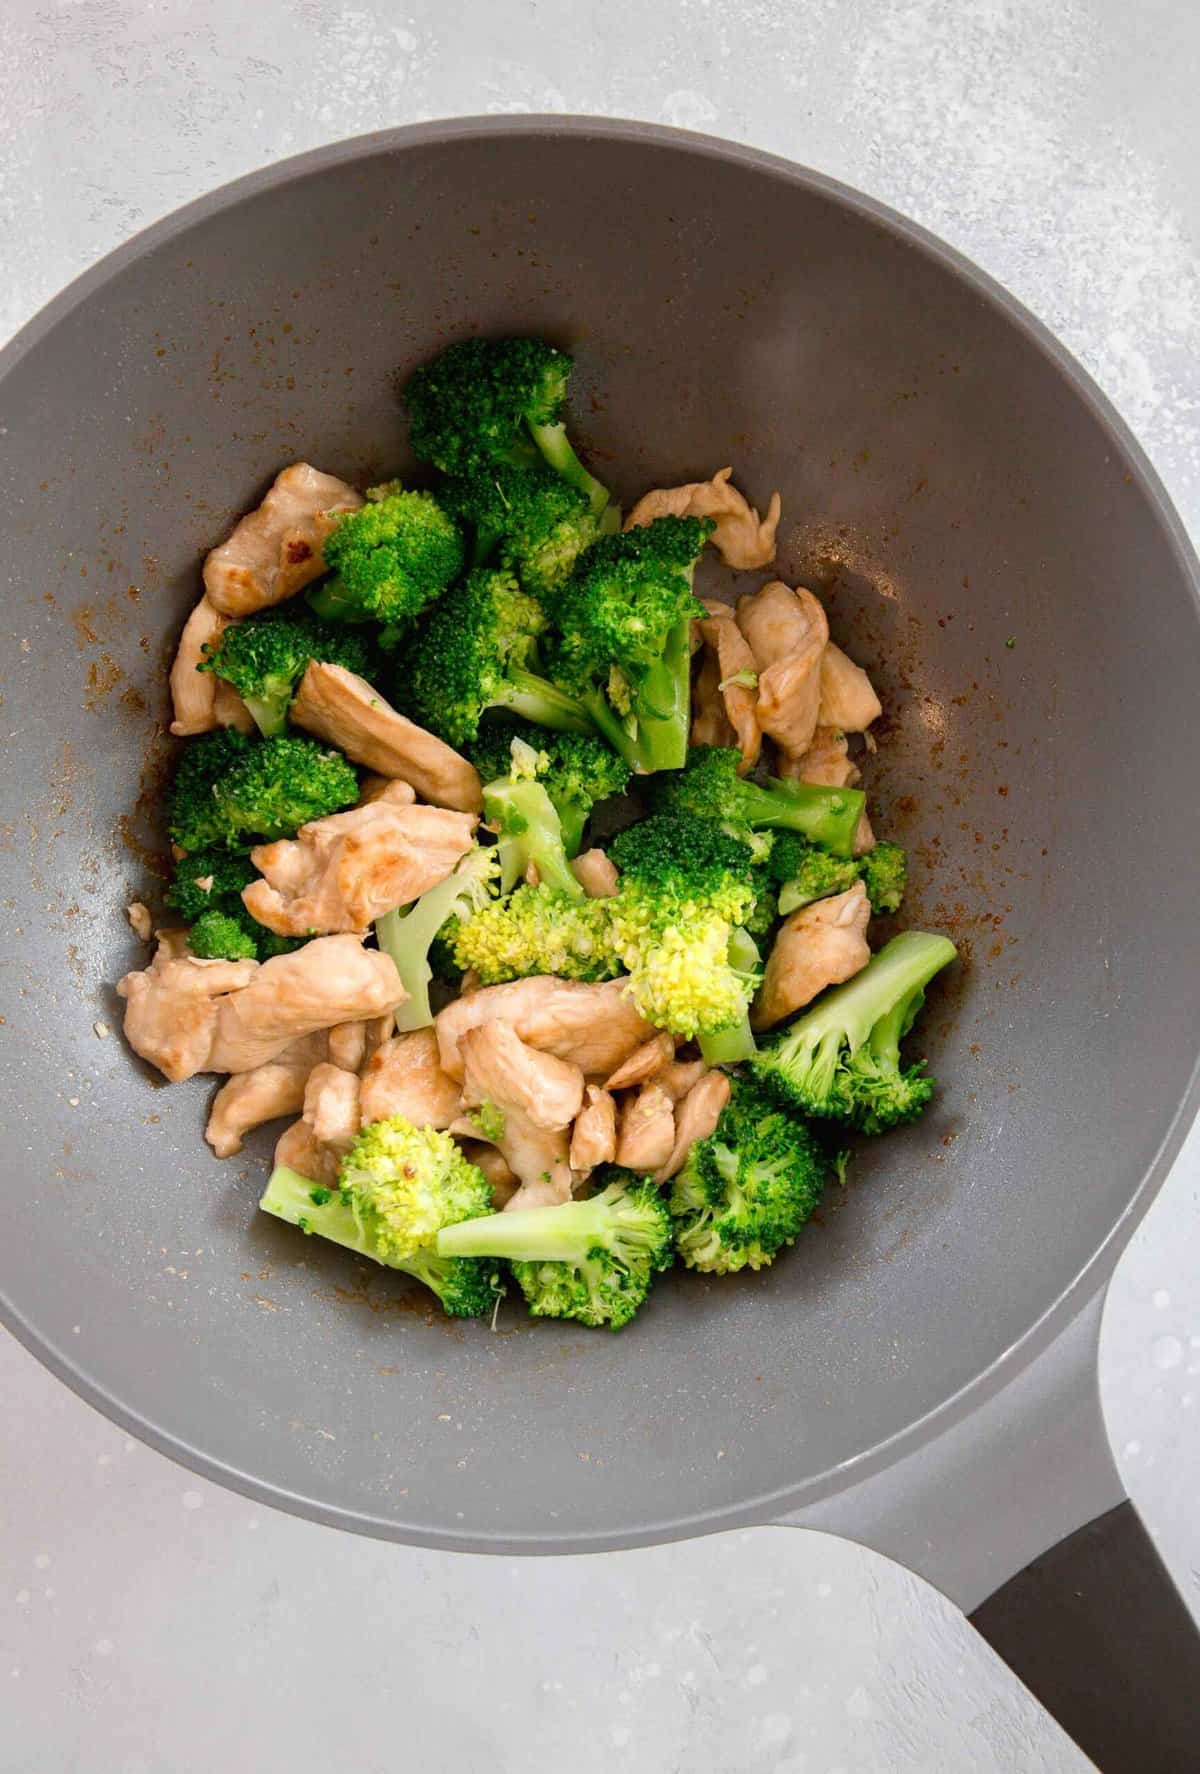 broccoli florets added to the wok along with the browned chicken